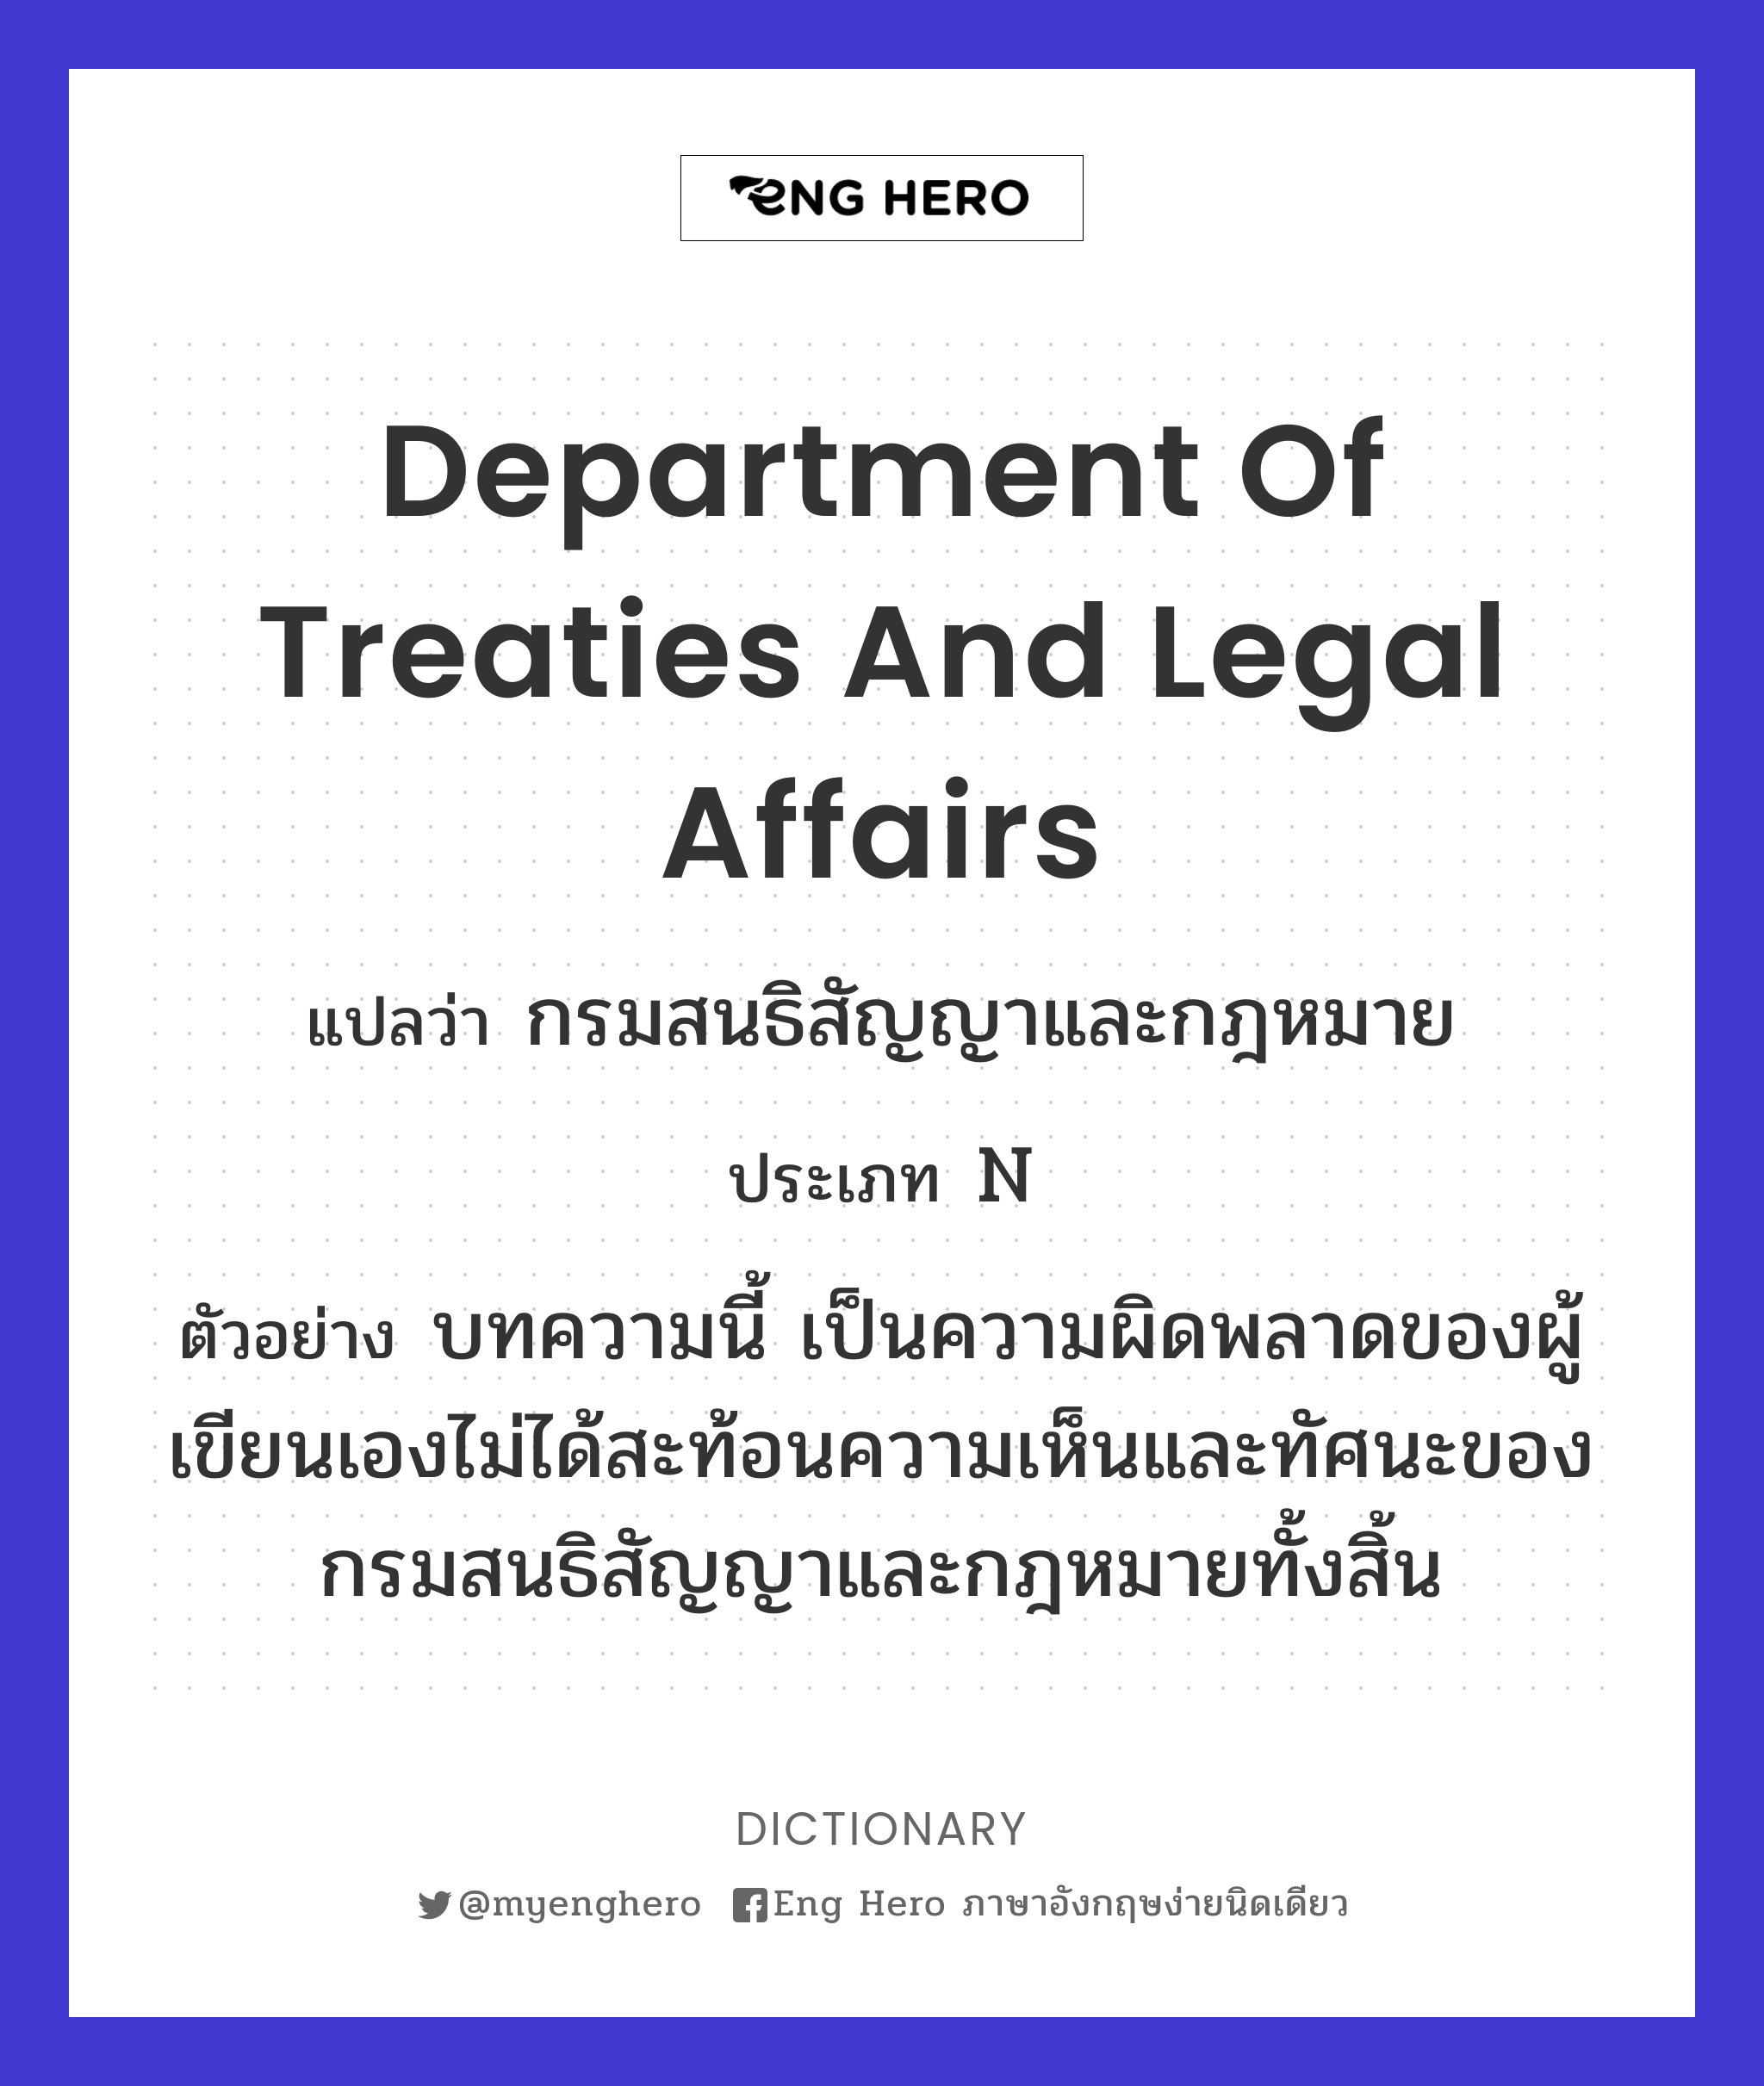 Department of Treaties and Legal Affairs